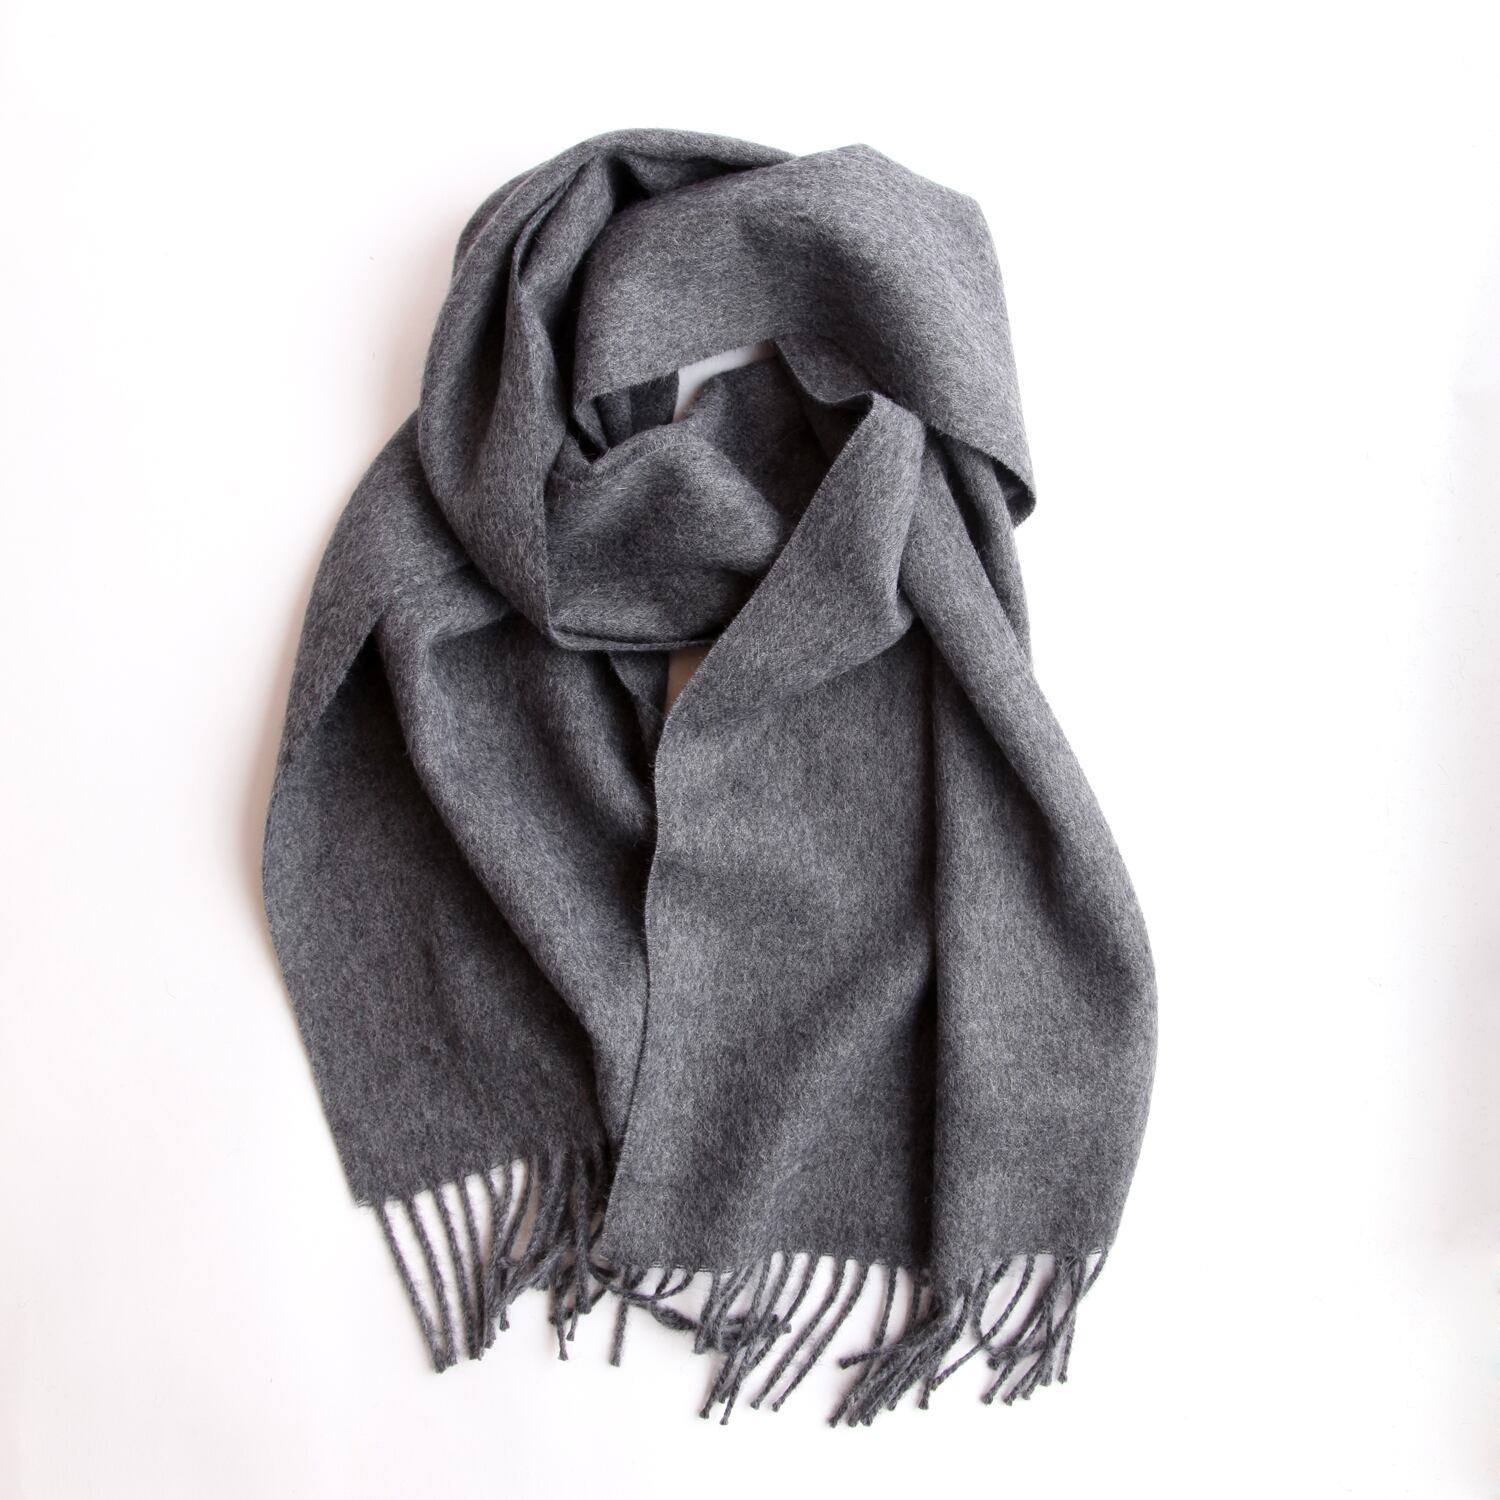 THE INOUE BROTHERS／Brushed Scarf／Grey